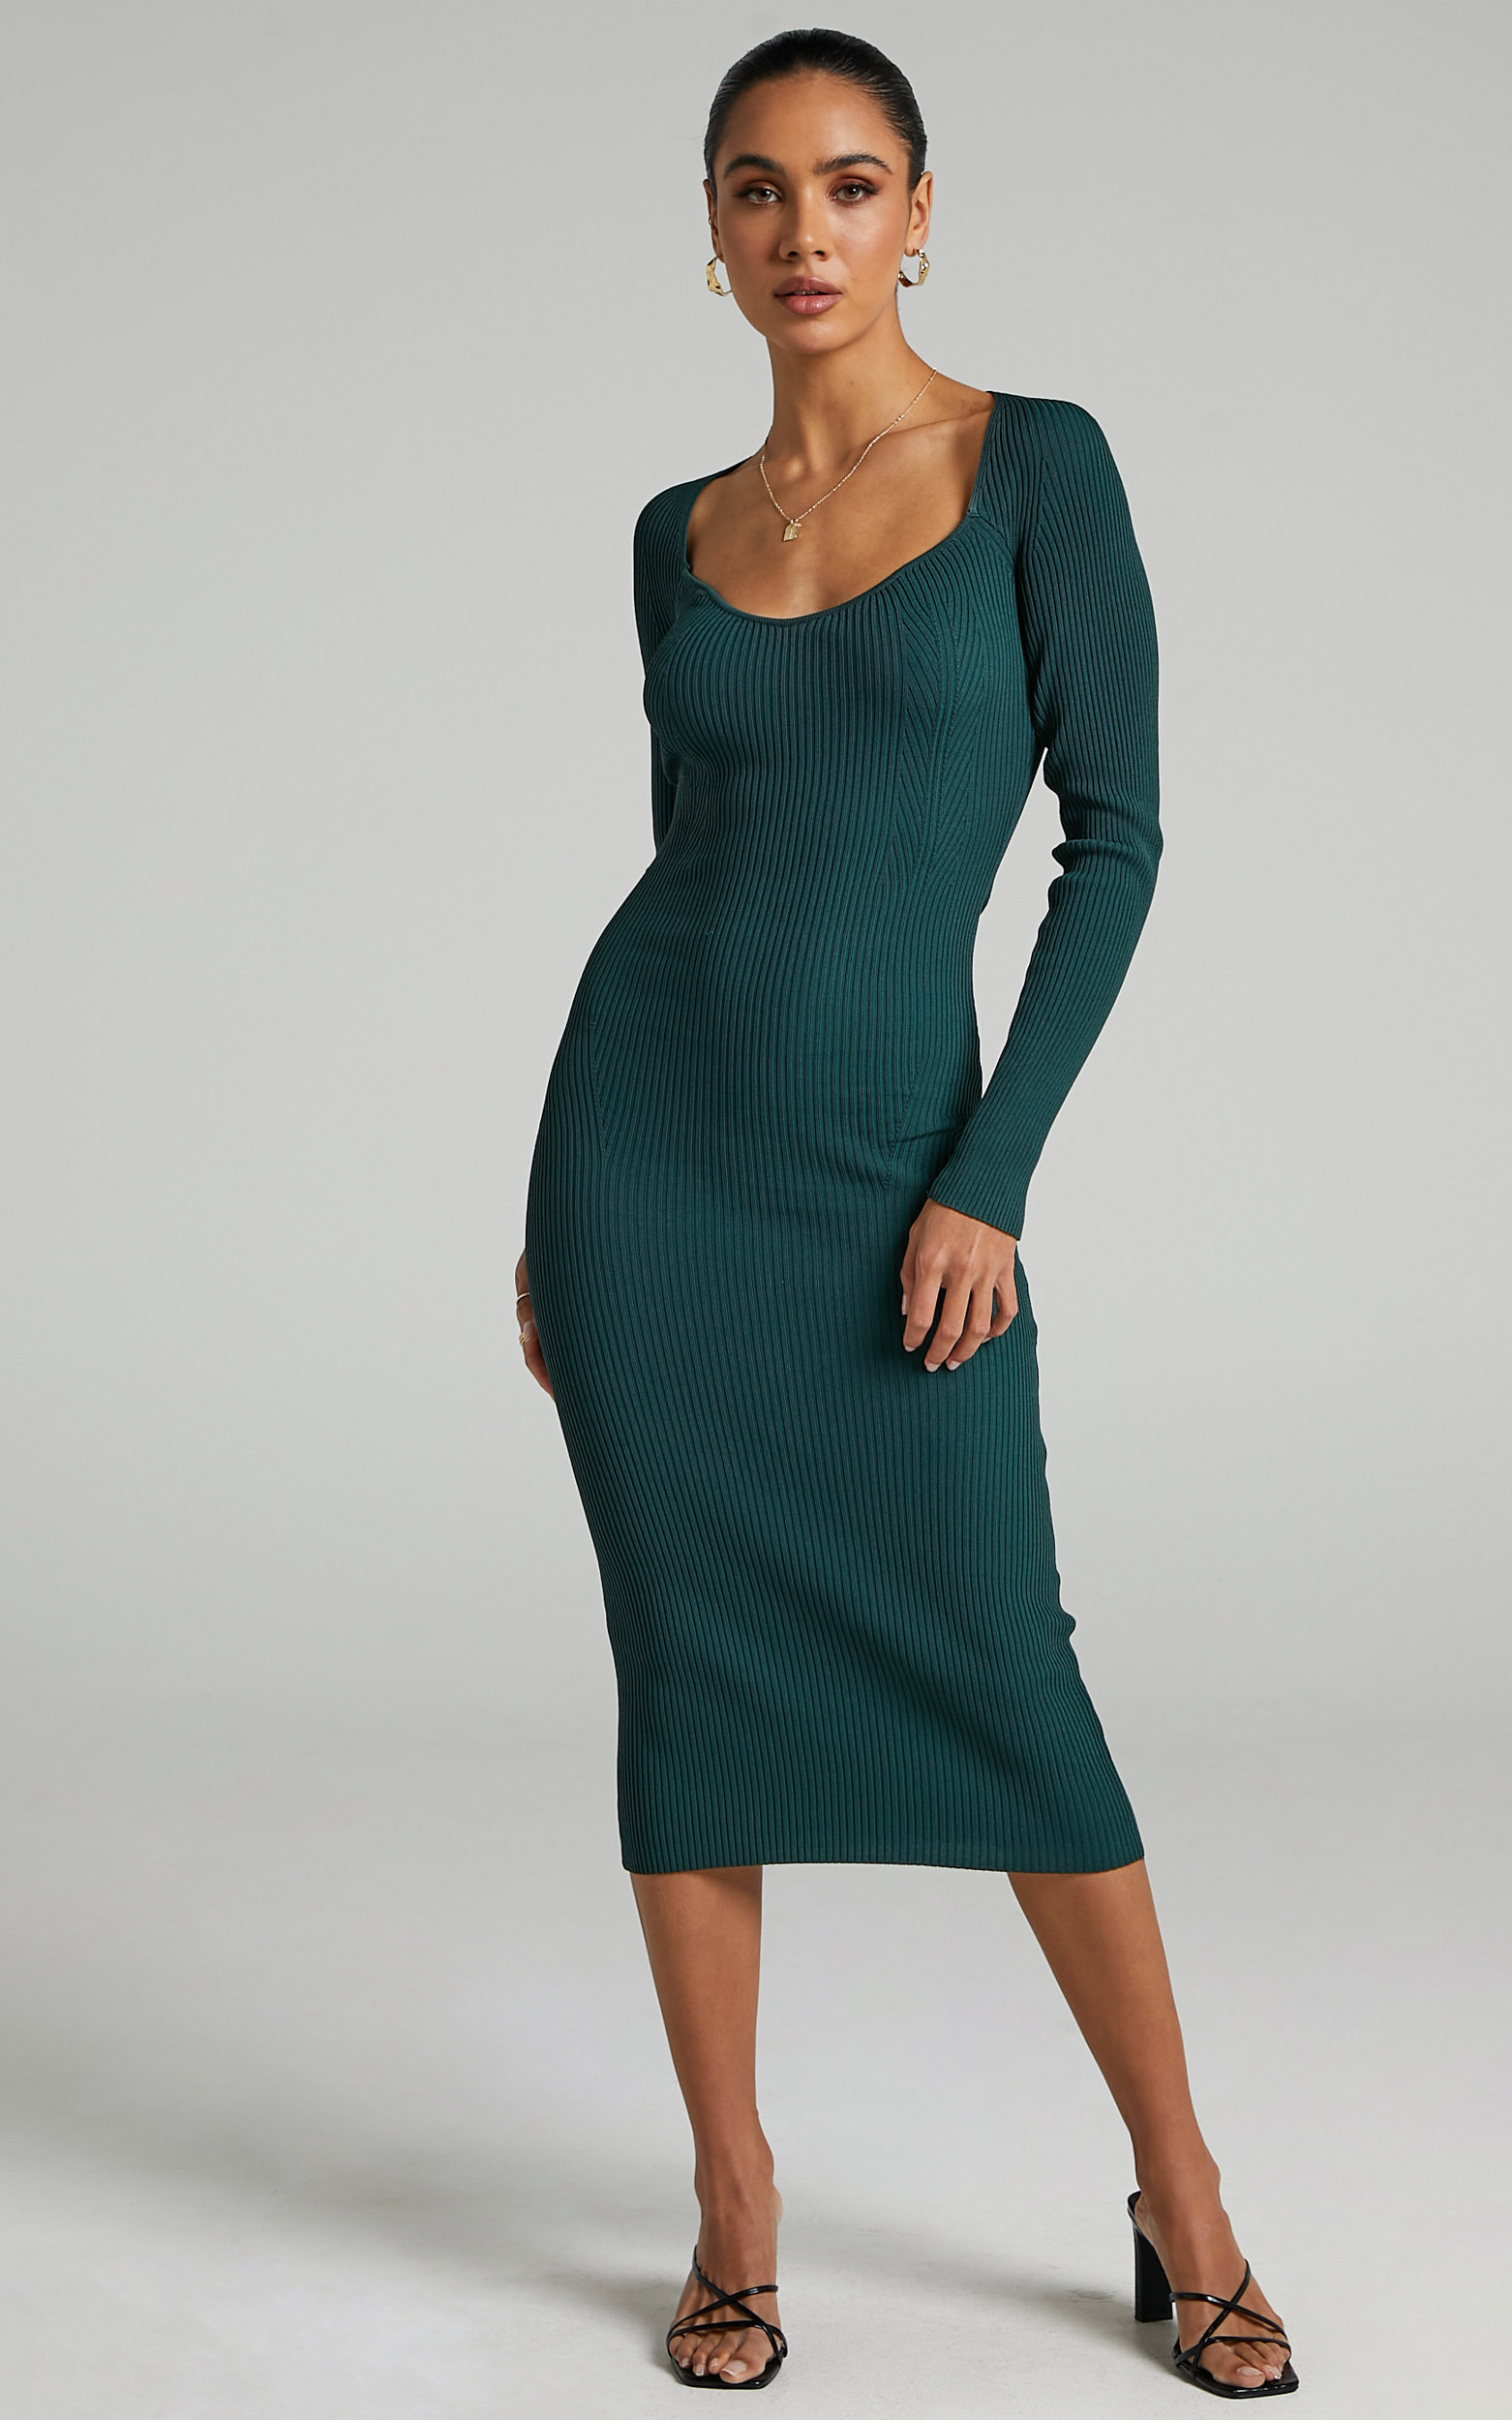 Charmaine  Sweetheart Neckline Maxi Rib Dress in Emerald - 06, GRN1, hi-res image number null